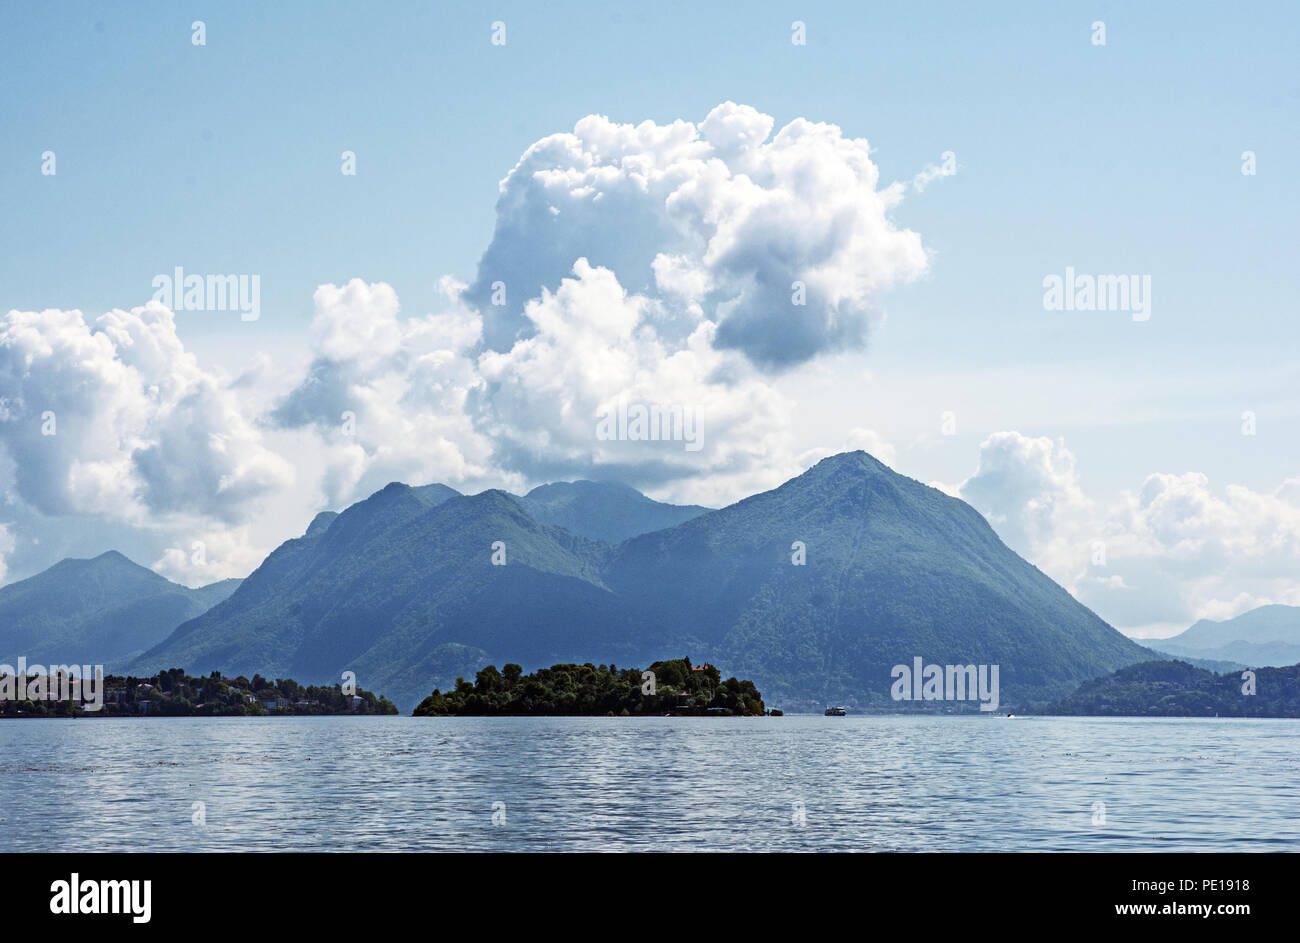 View of Lake Maggiore from Baveno Italy with Isola Madre and the mountains beyond.  Cumulus clouds and blue sky. Stock Photo